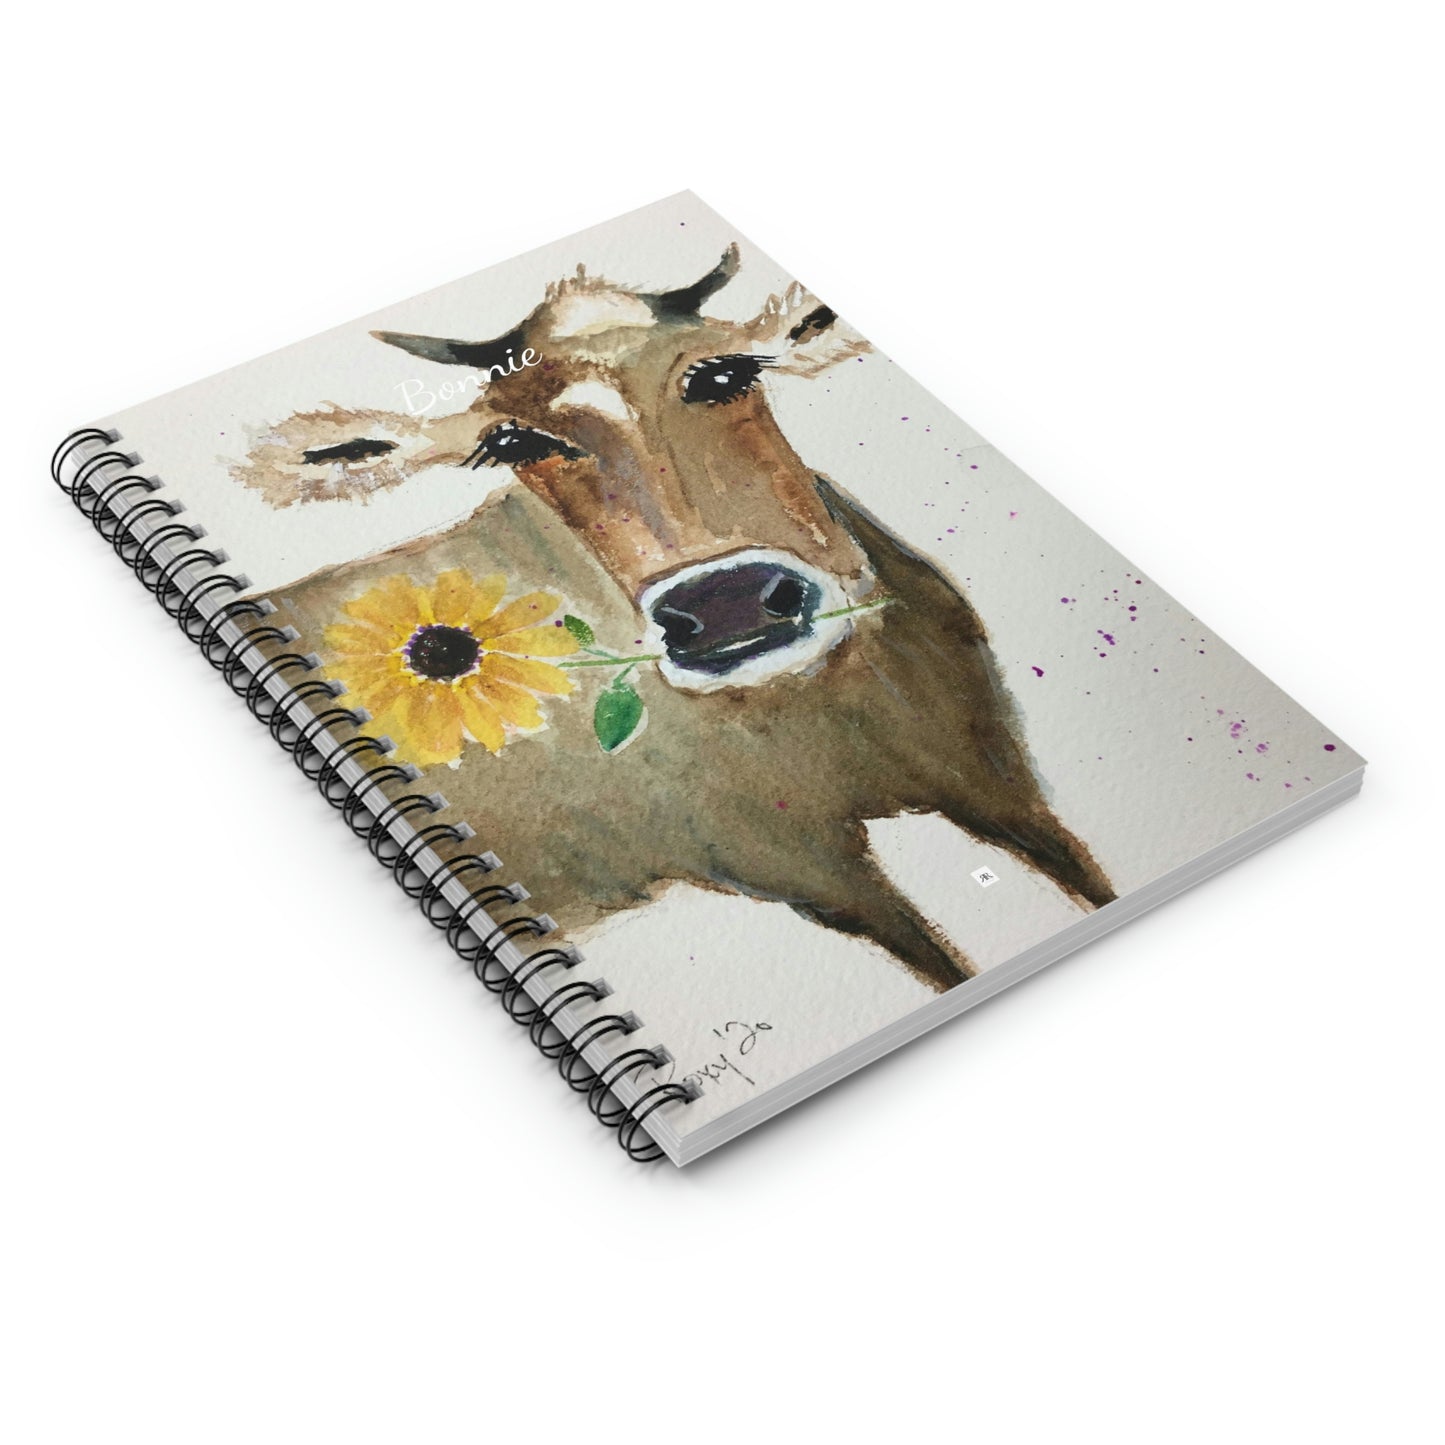 Bonnie - Whimsical Cow Painting Spiral Notebook